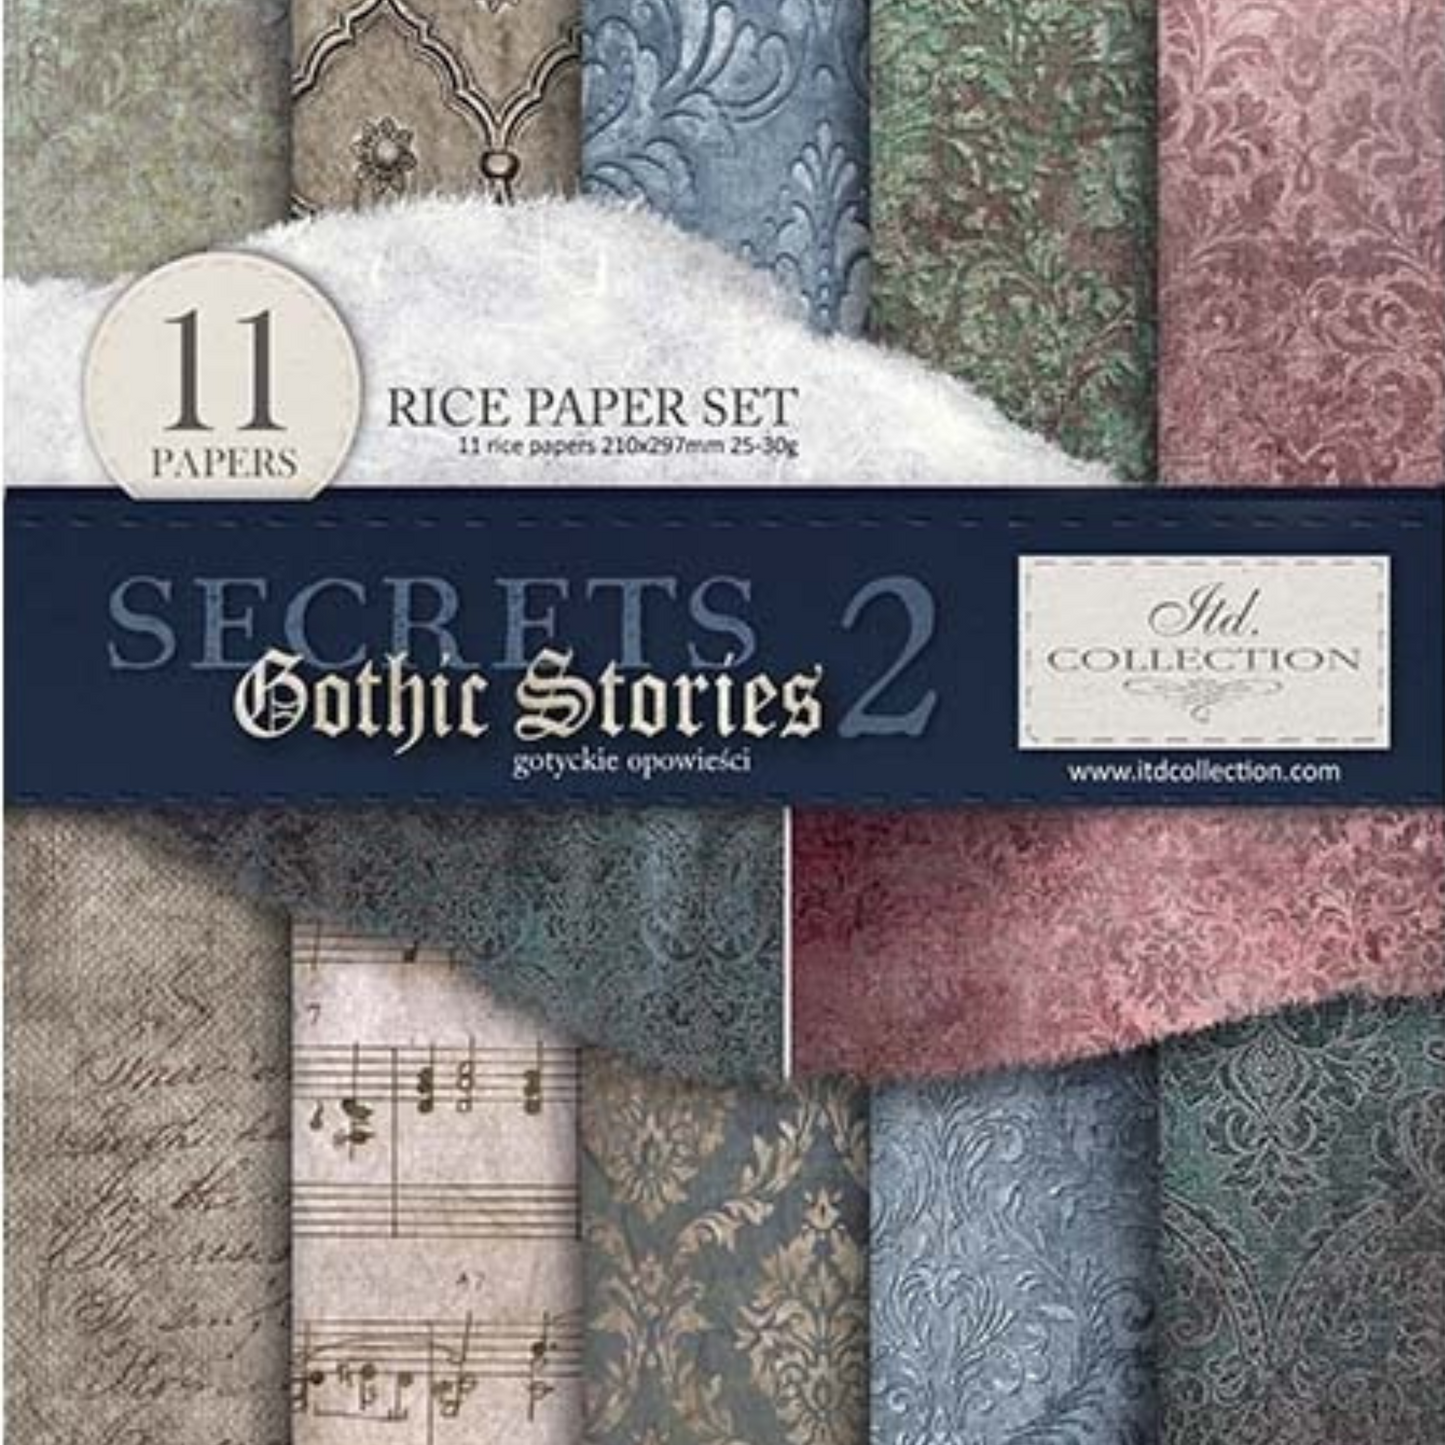 "Gothic Stories 2" decoupage rice paper set of 11 size A4 sheets by ITD Colleciton. Front Cover. Avaialble at Milton's Daughter